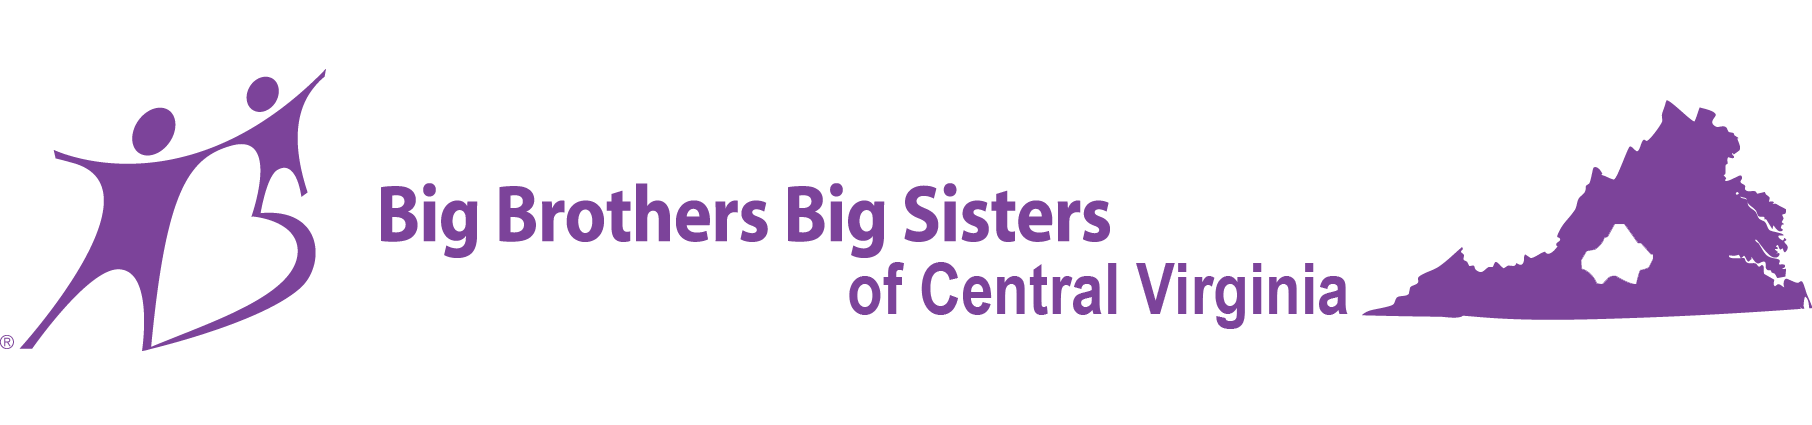 Pete Warren, Big Brothers Big Sisters of Central Virginia
in a letter to Ambassador Andrew Young